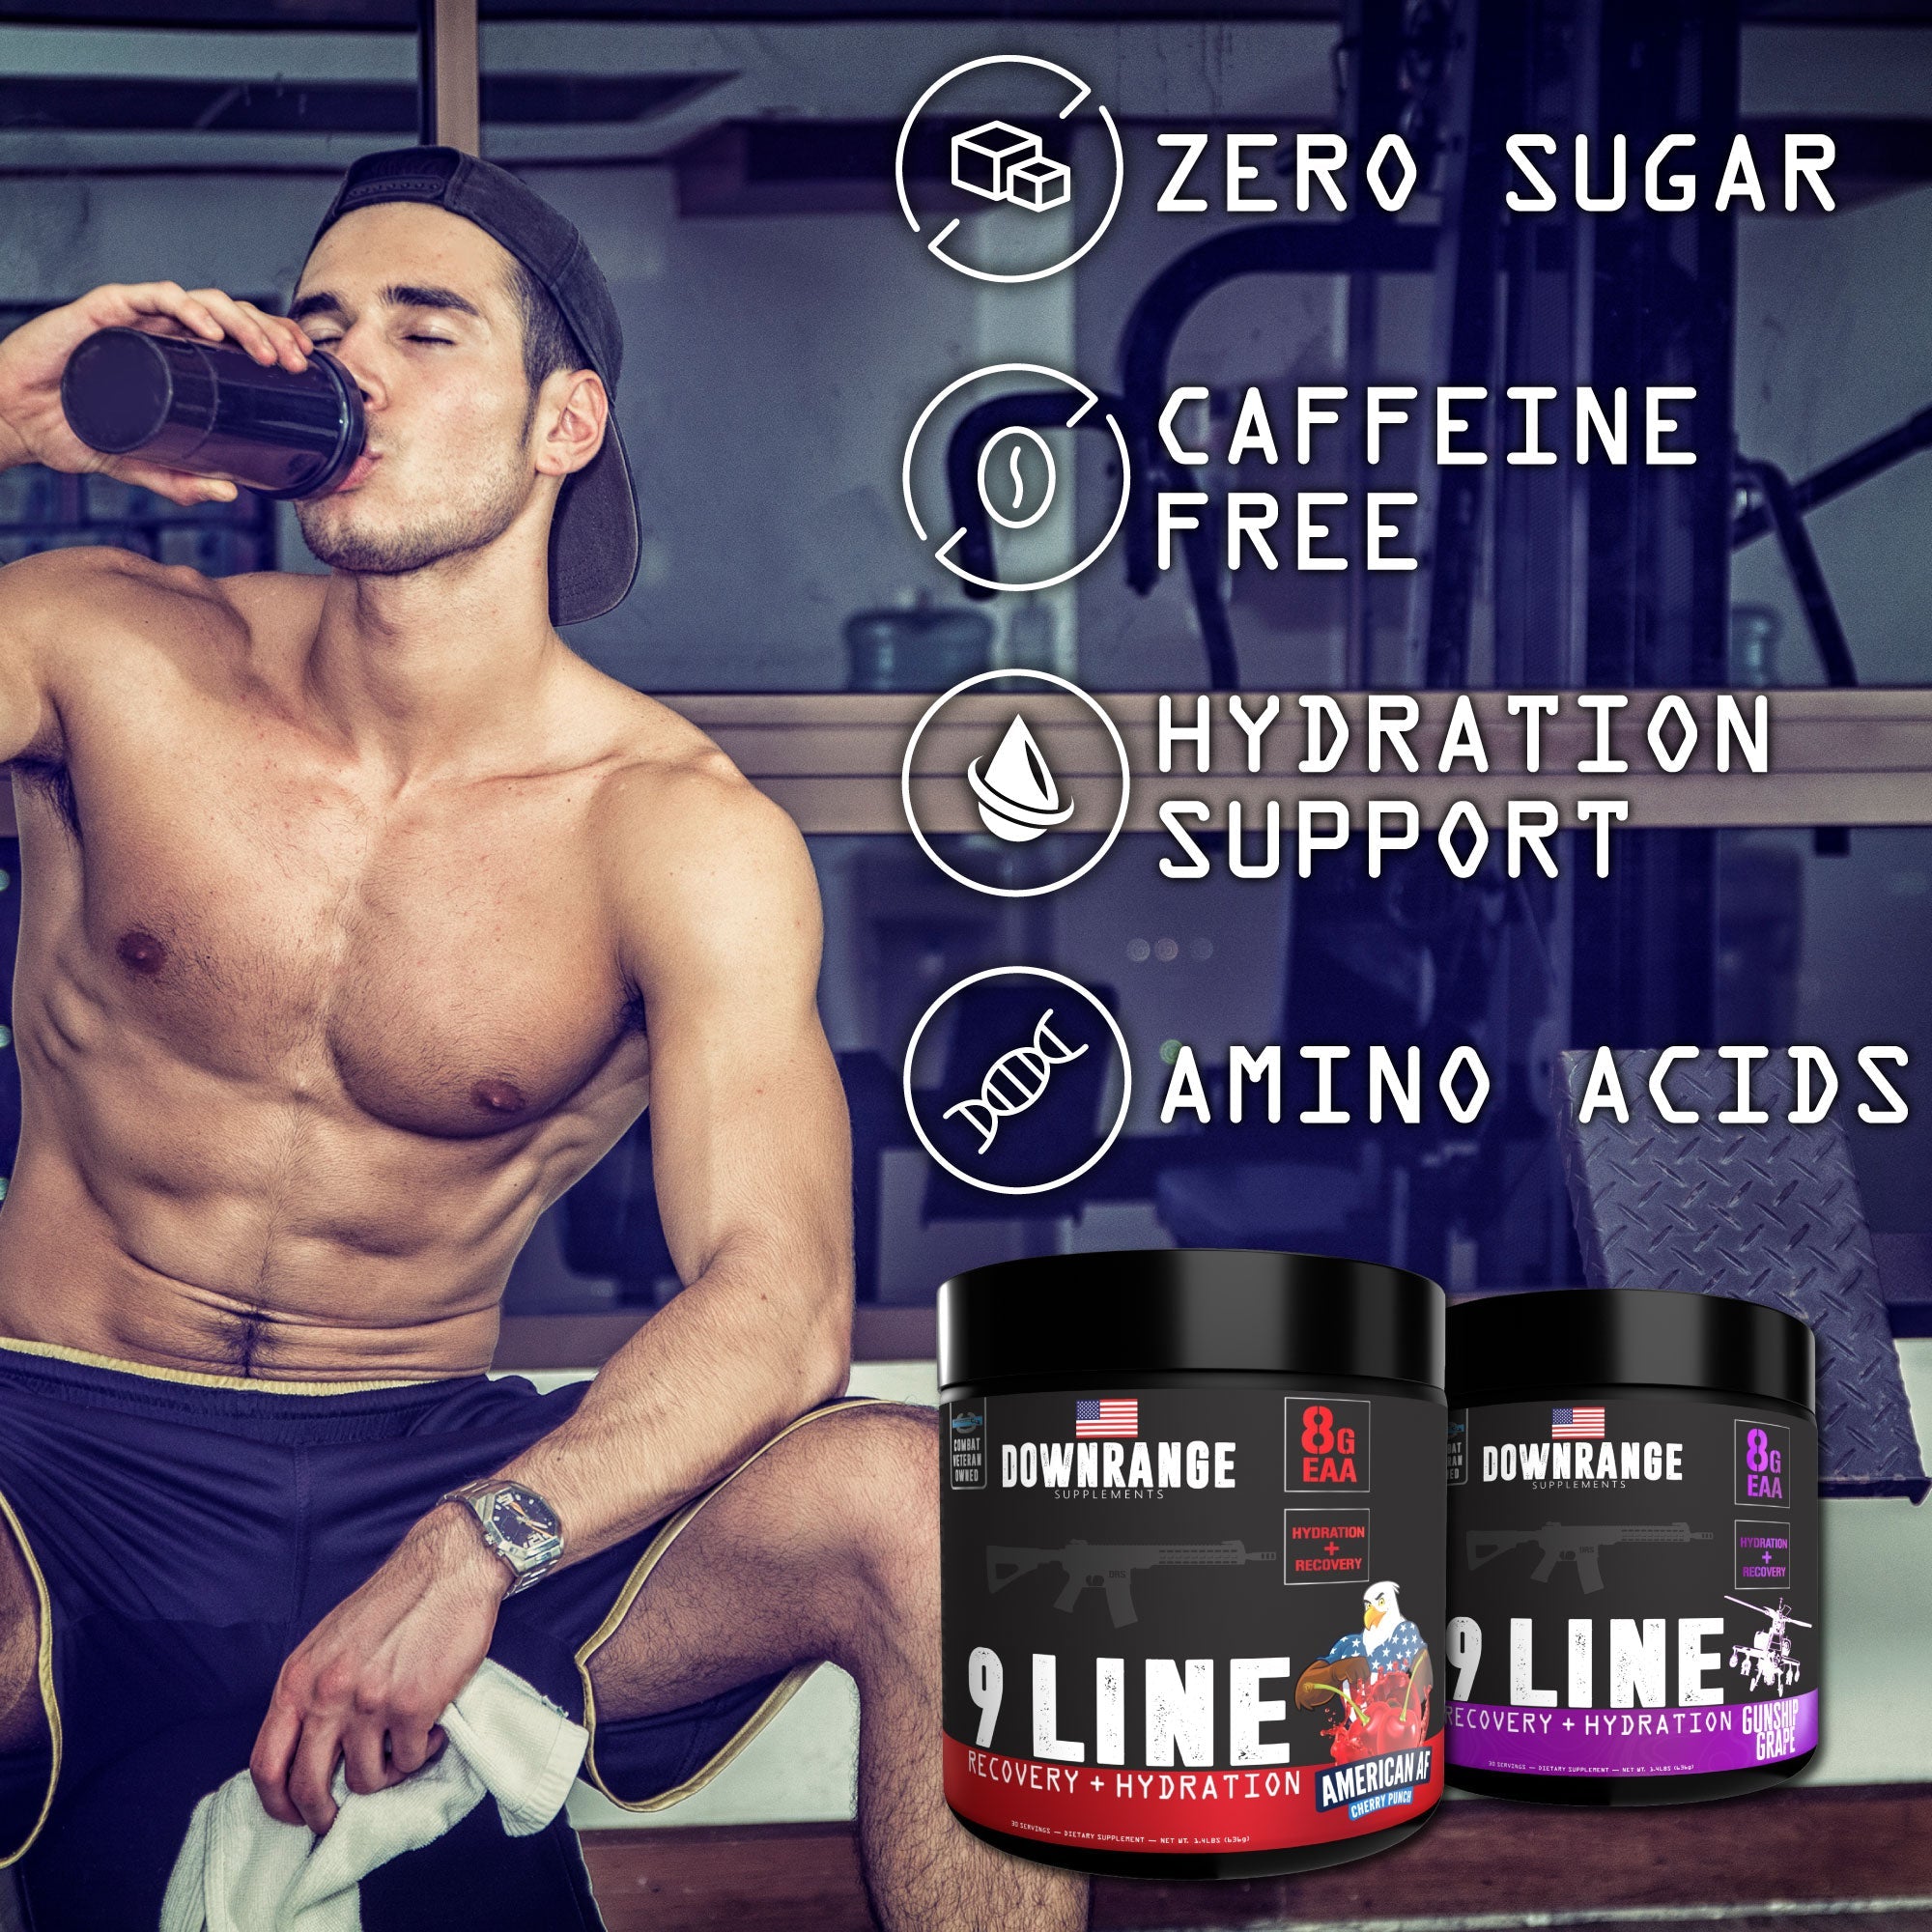 RECOVERY + HYDRATION - DownRange Supplements